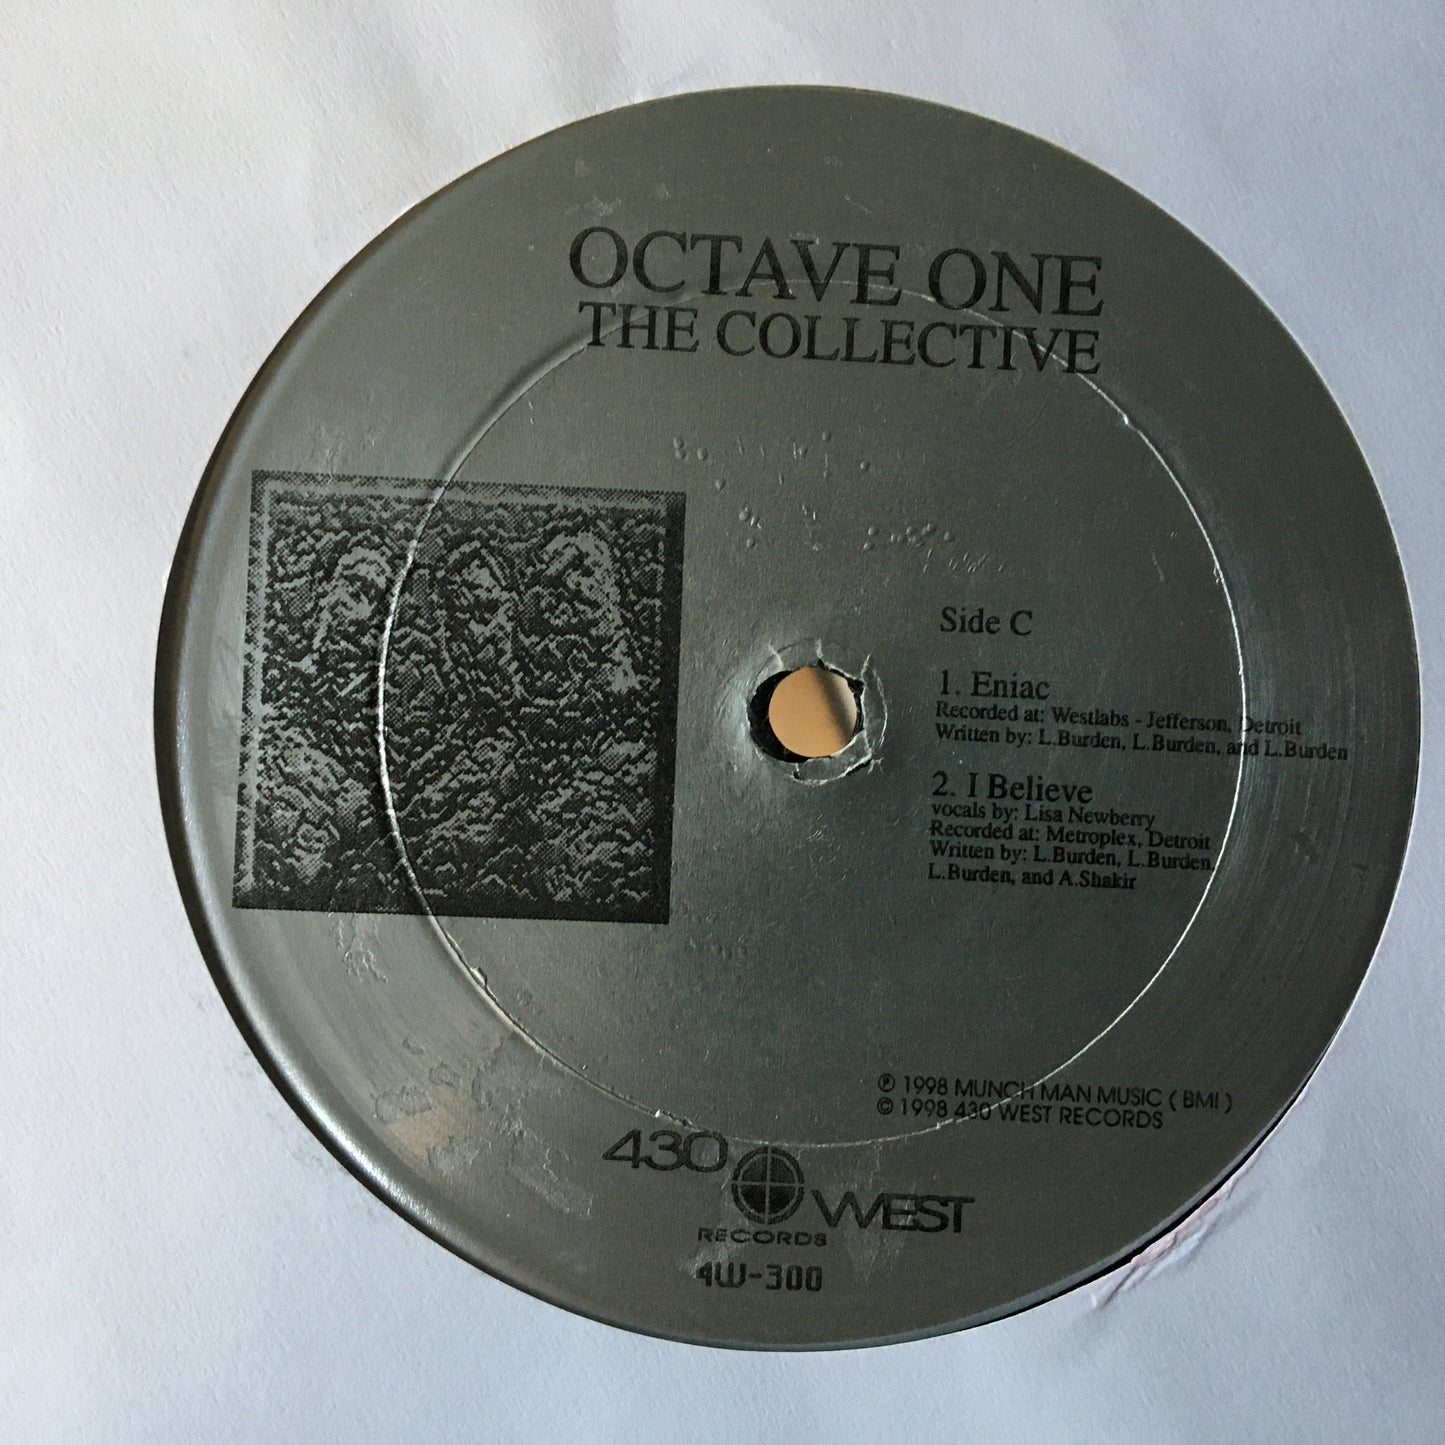 Octave One – The Collective